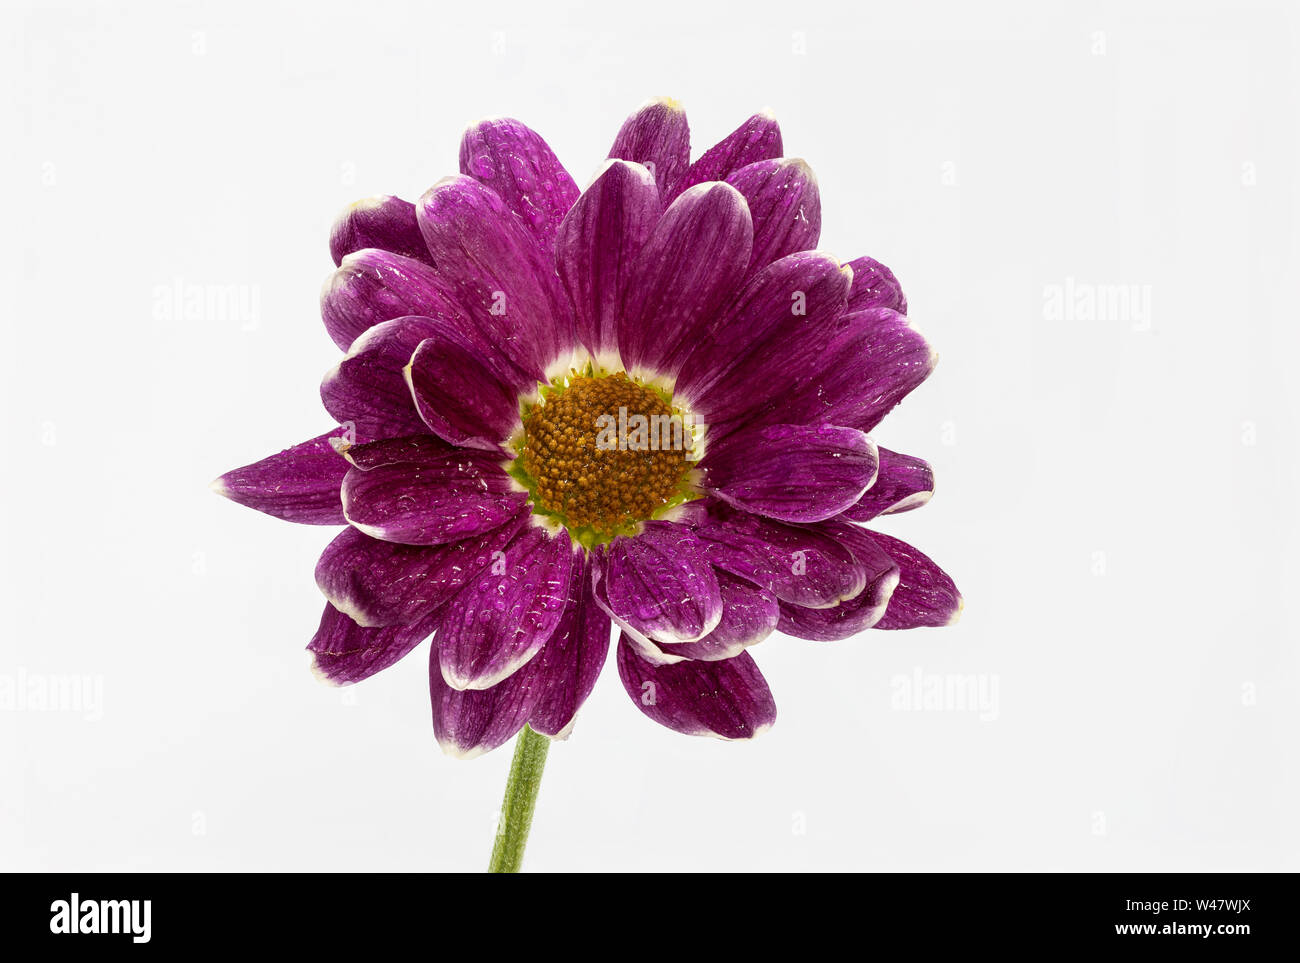 Focus Stacked Gerbera Germini flower isolated on a white background Stock Photo